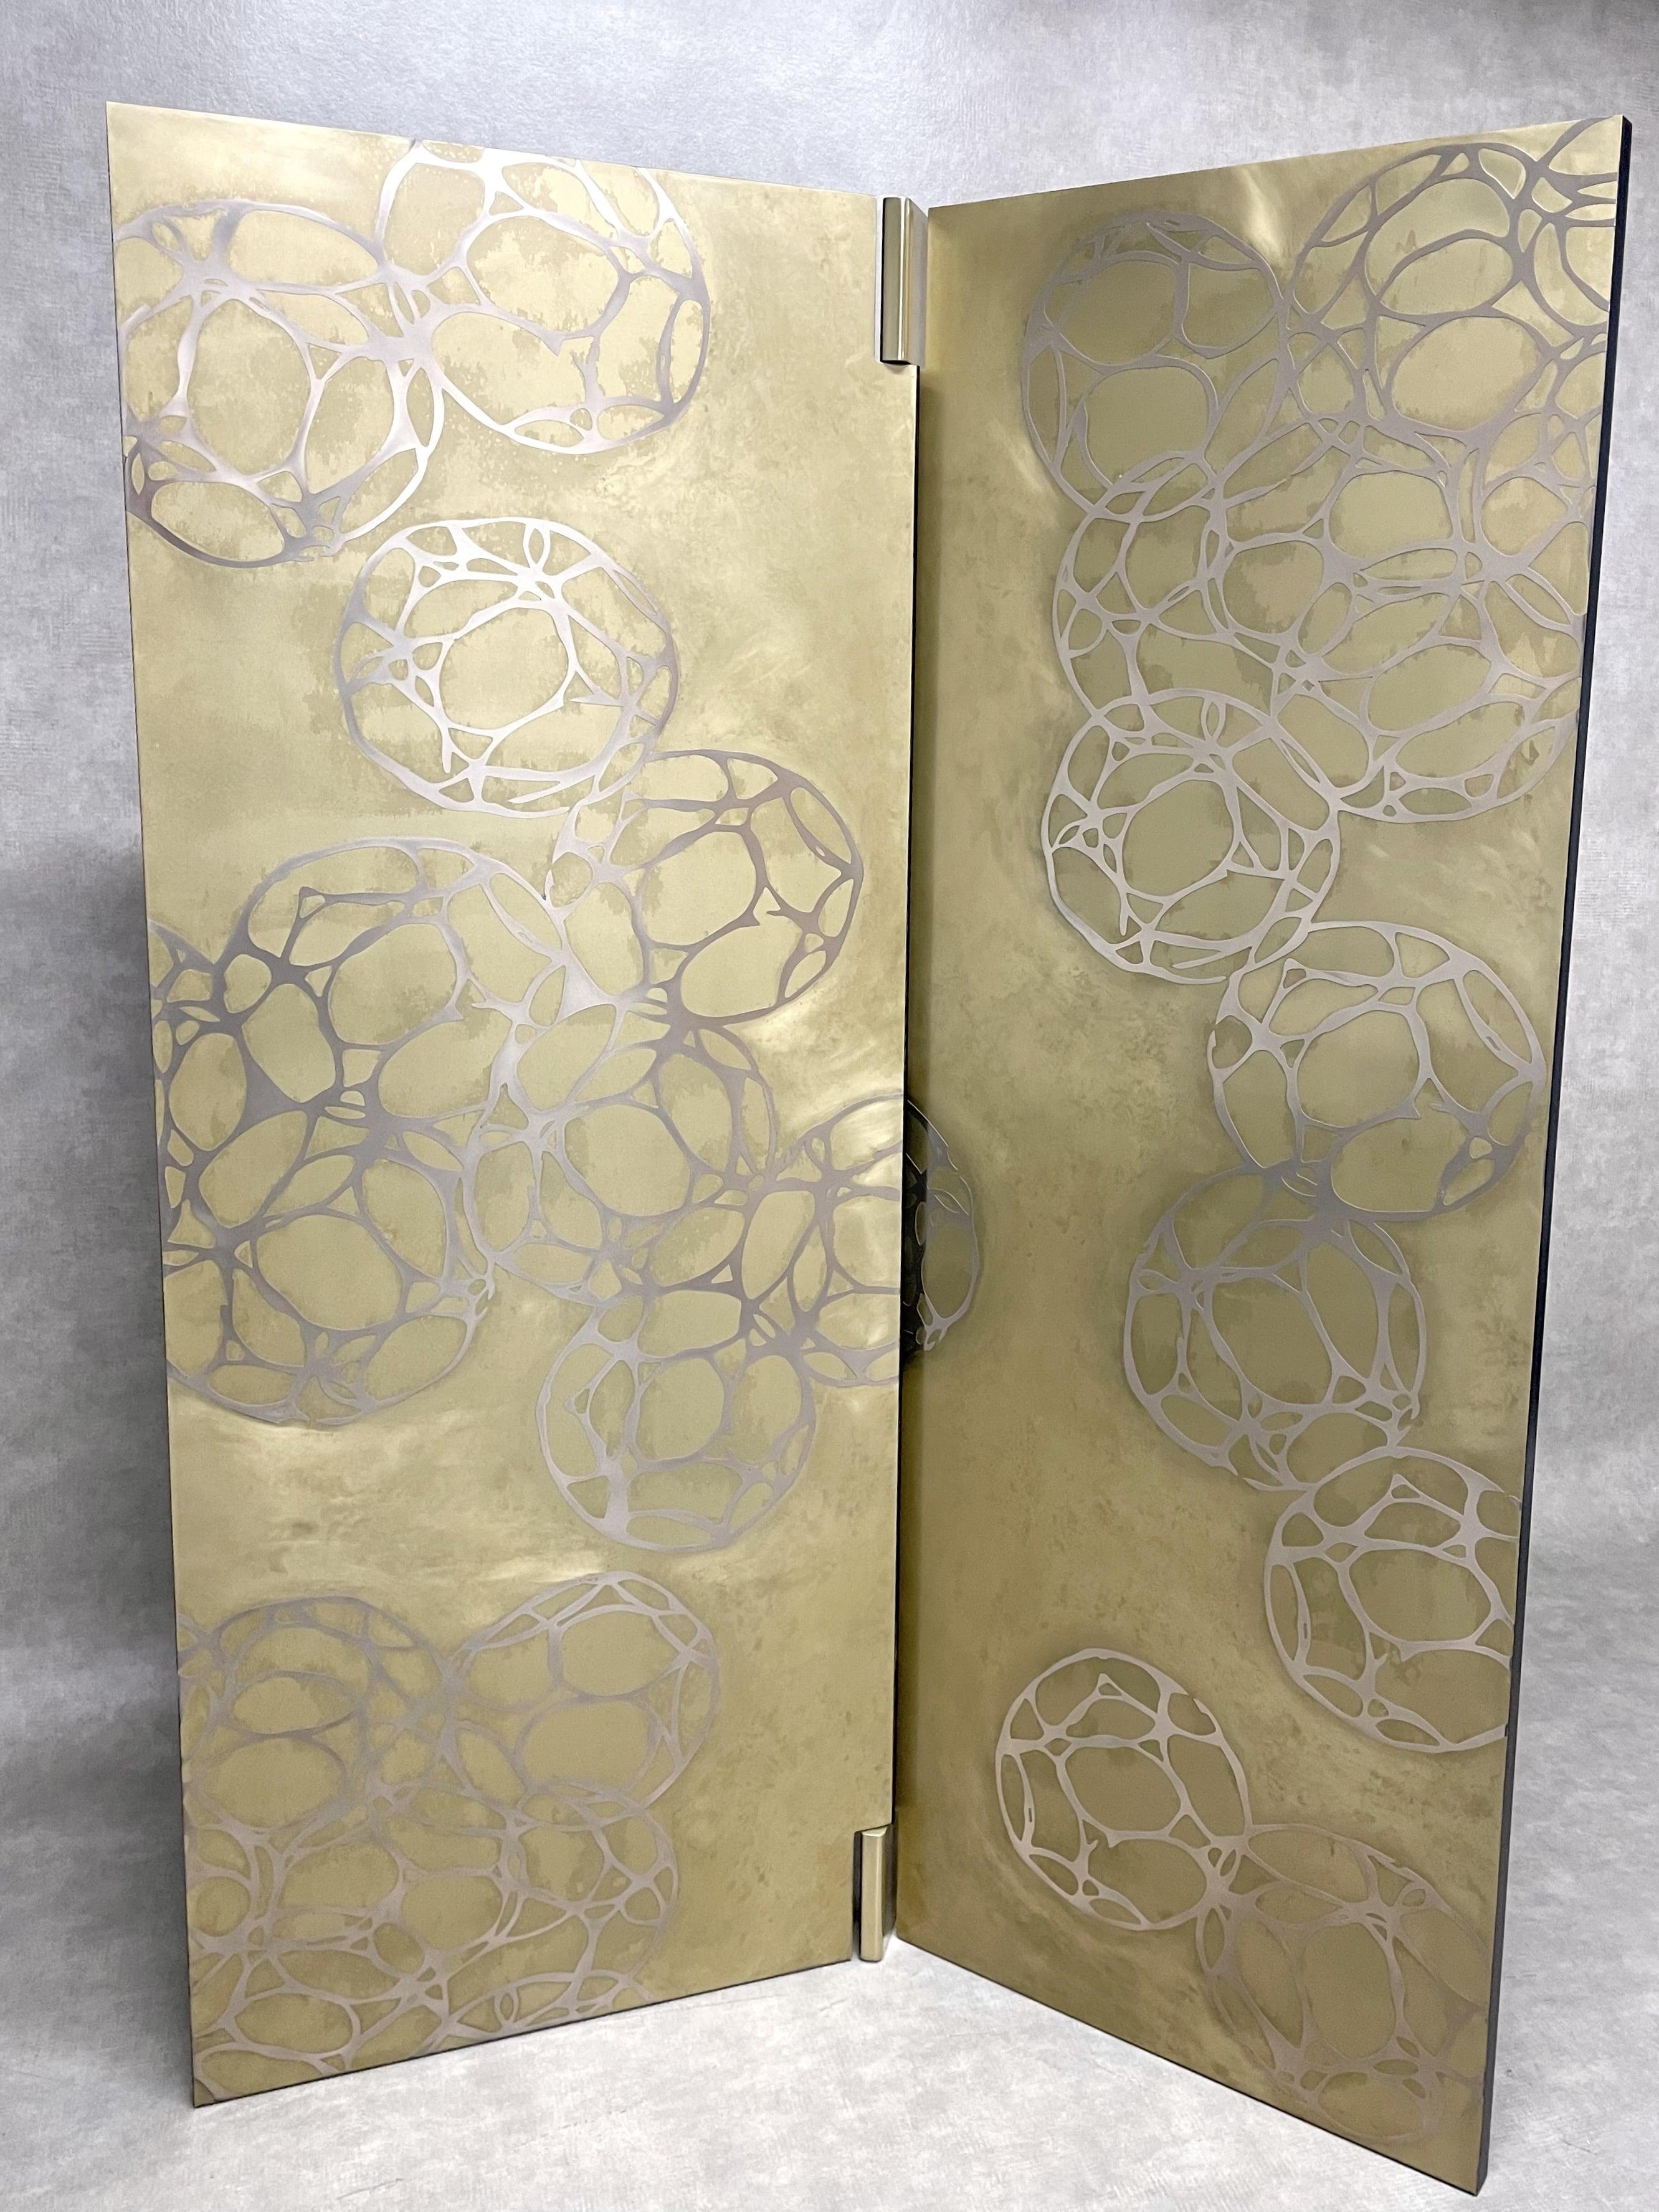 Hand-Crafted Two-Panel Lacquer and Titanium Screen by Frédérique Domergue, Limited Edition For Sale